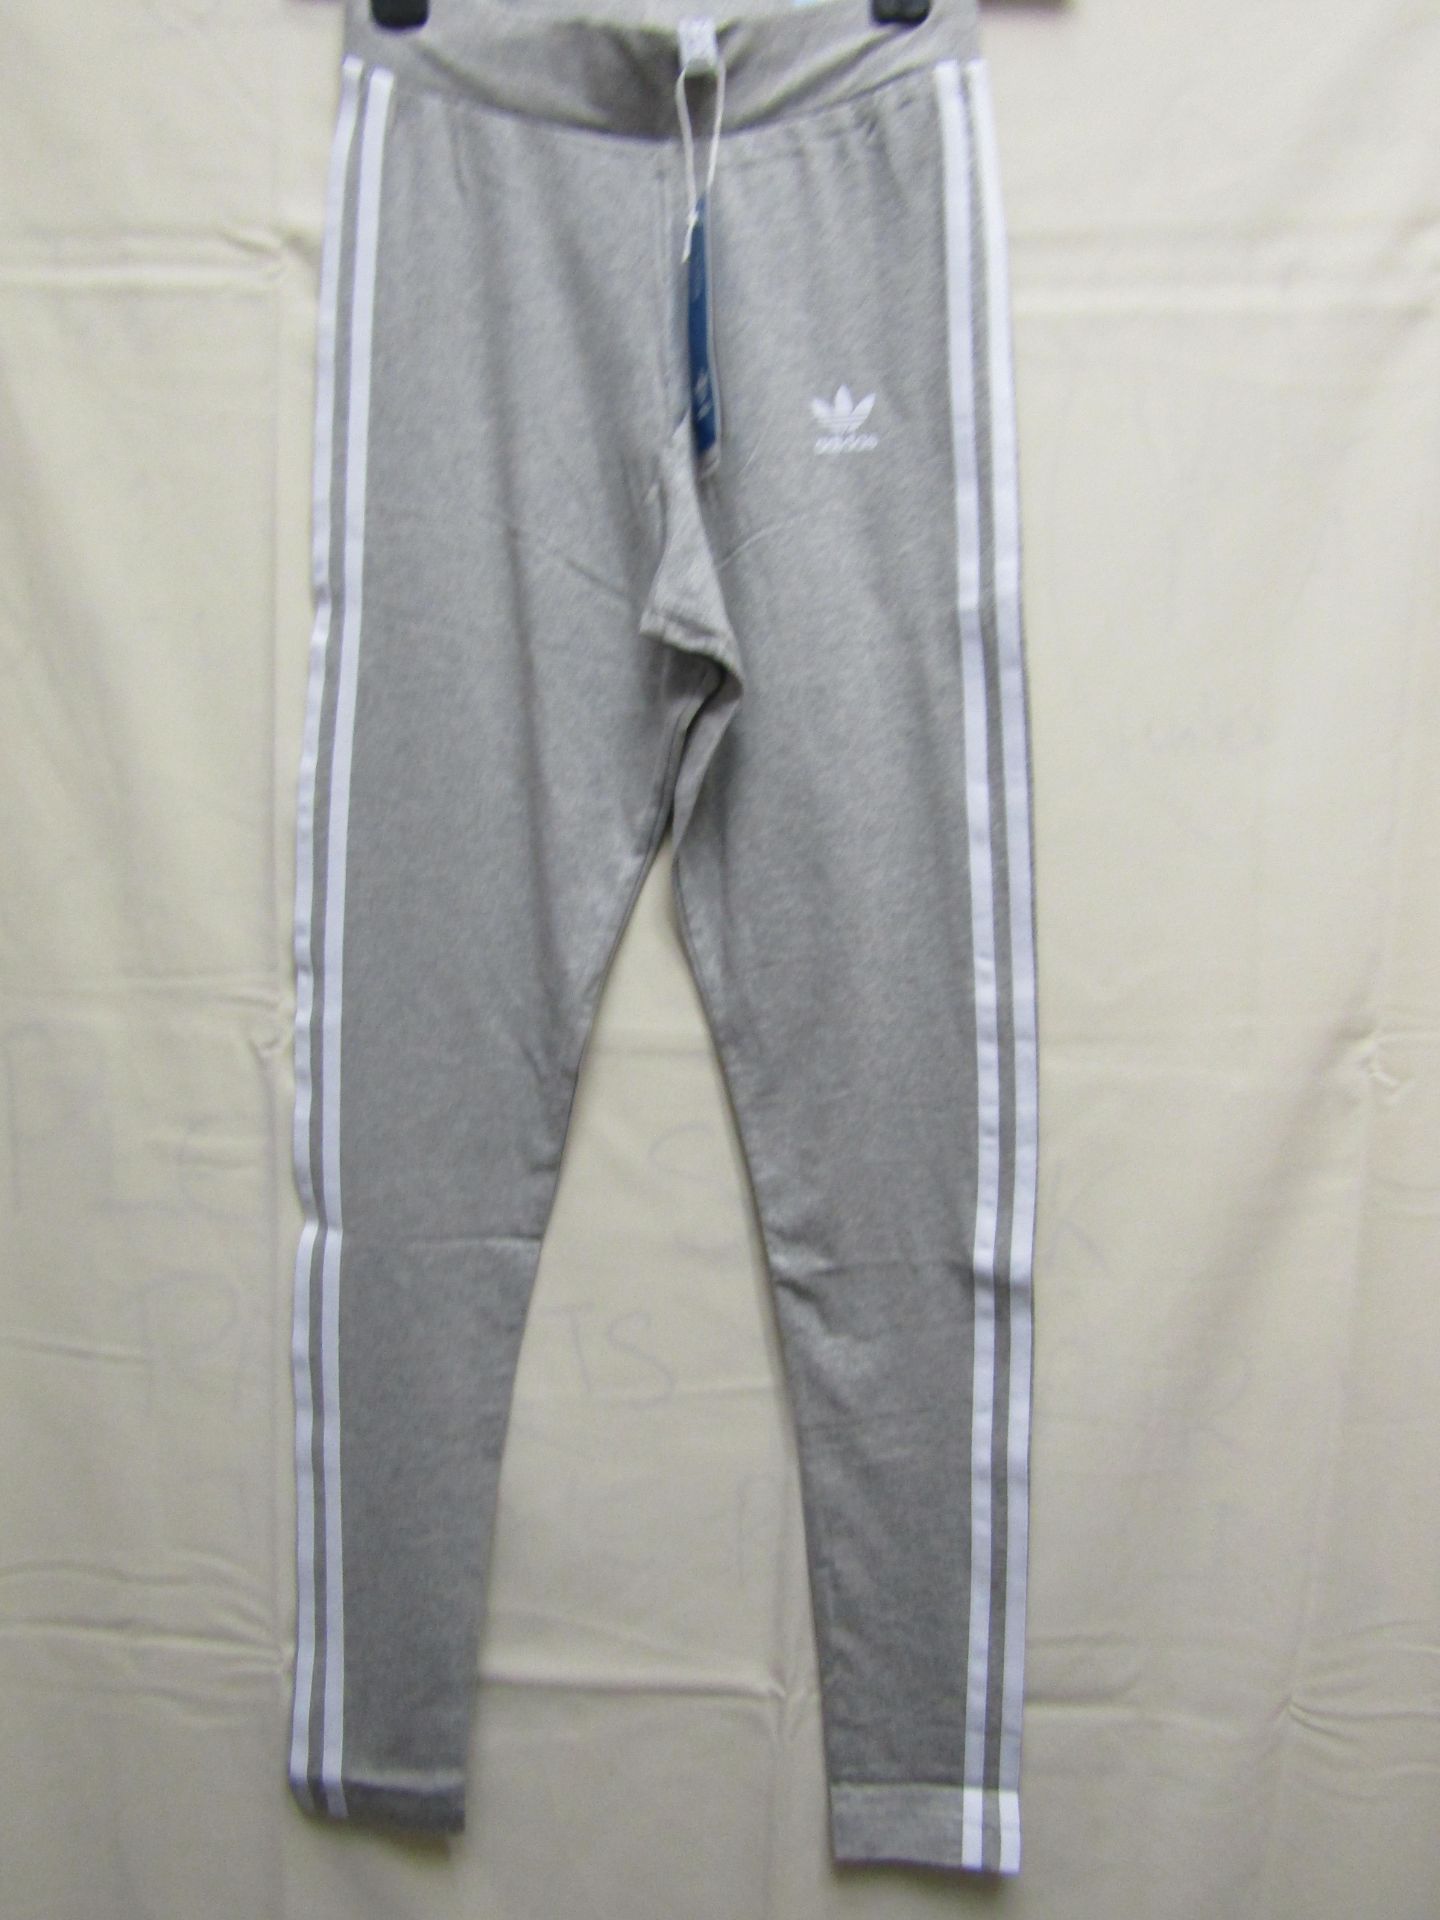 Adidas Running Pants Grey /White Leg Stripe Size 6 X/S New With Tags